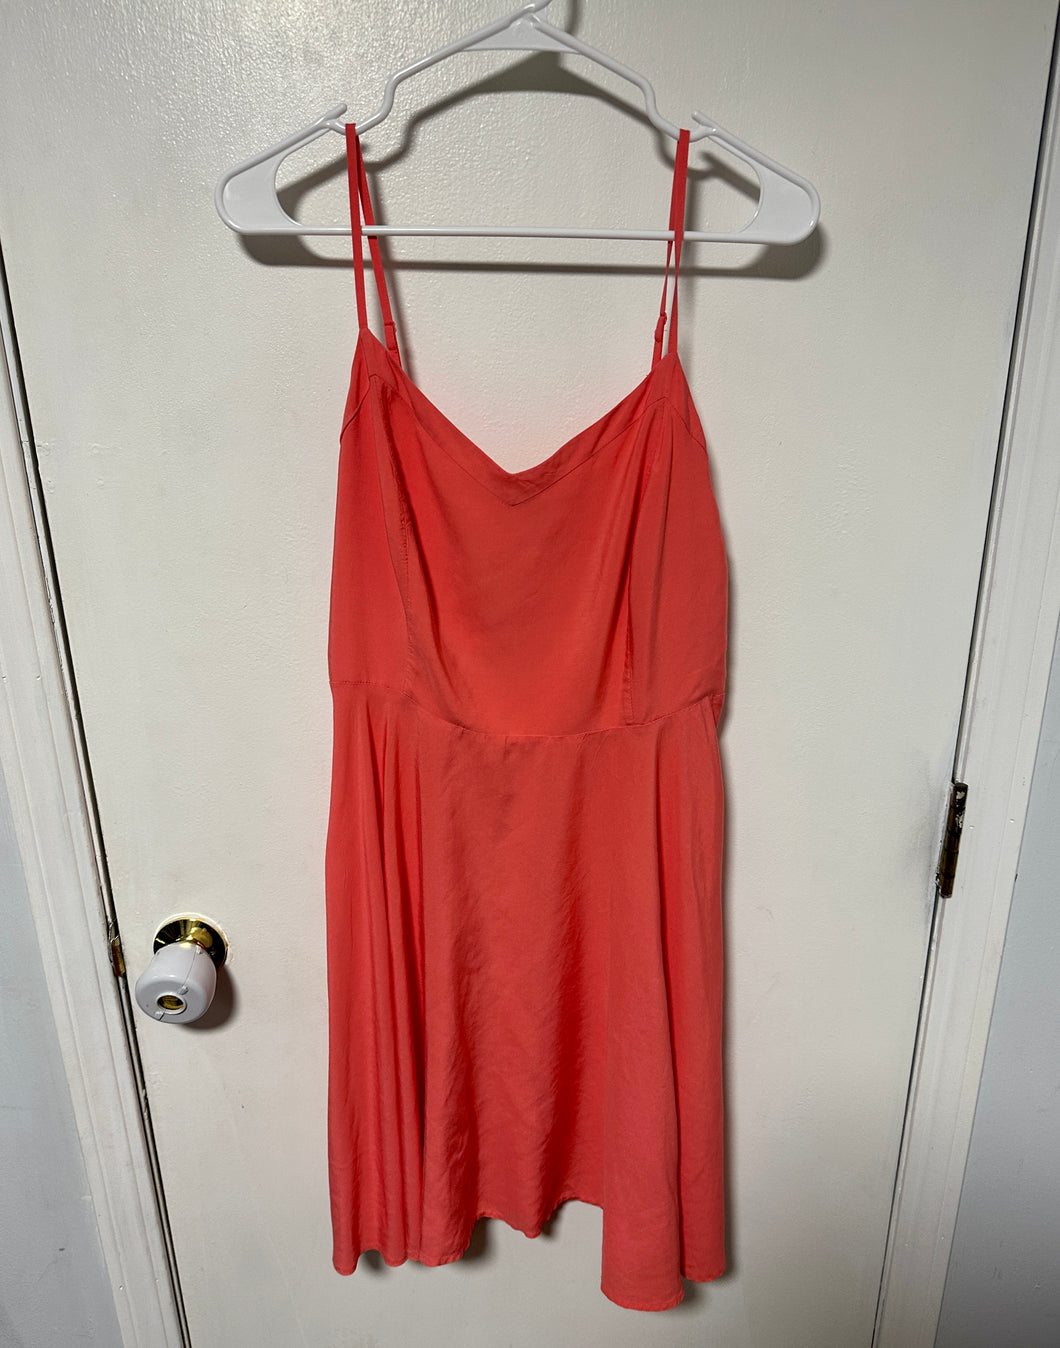 Old Navy - Strappy Coral Cotton Dres-Size Large - Excellent Condition Adult Large